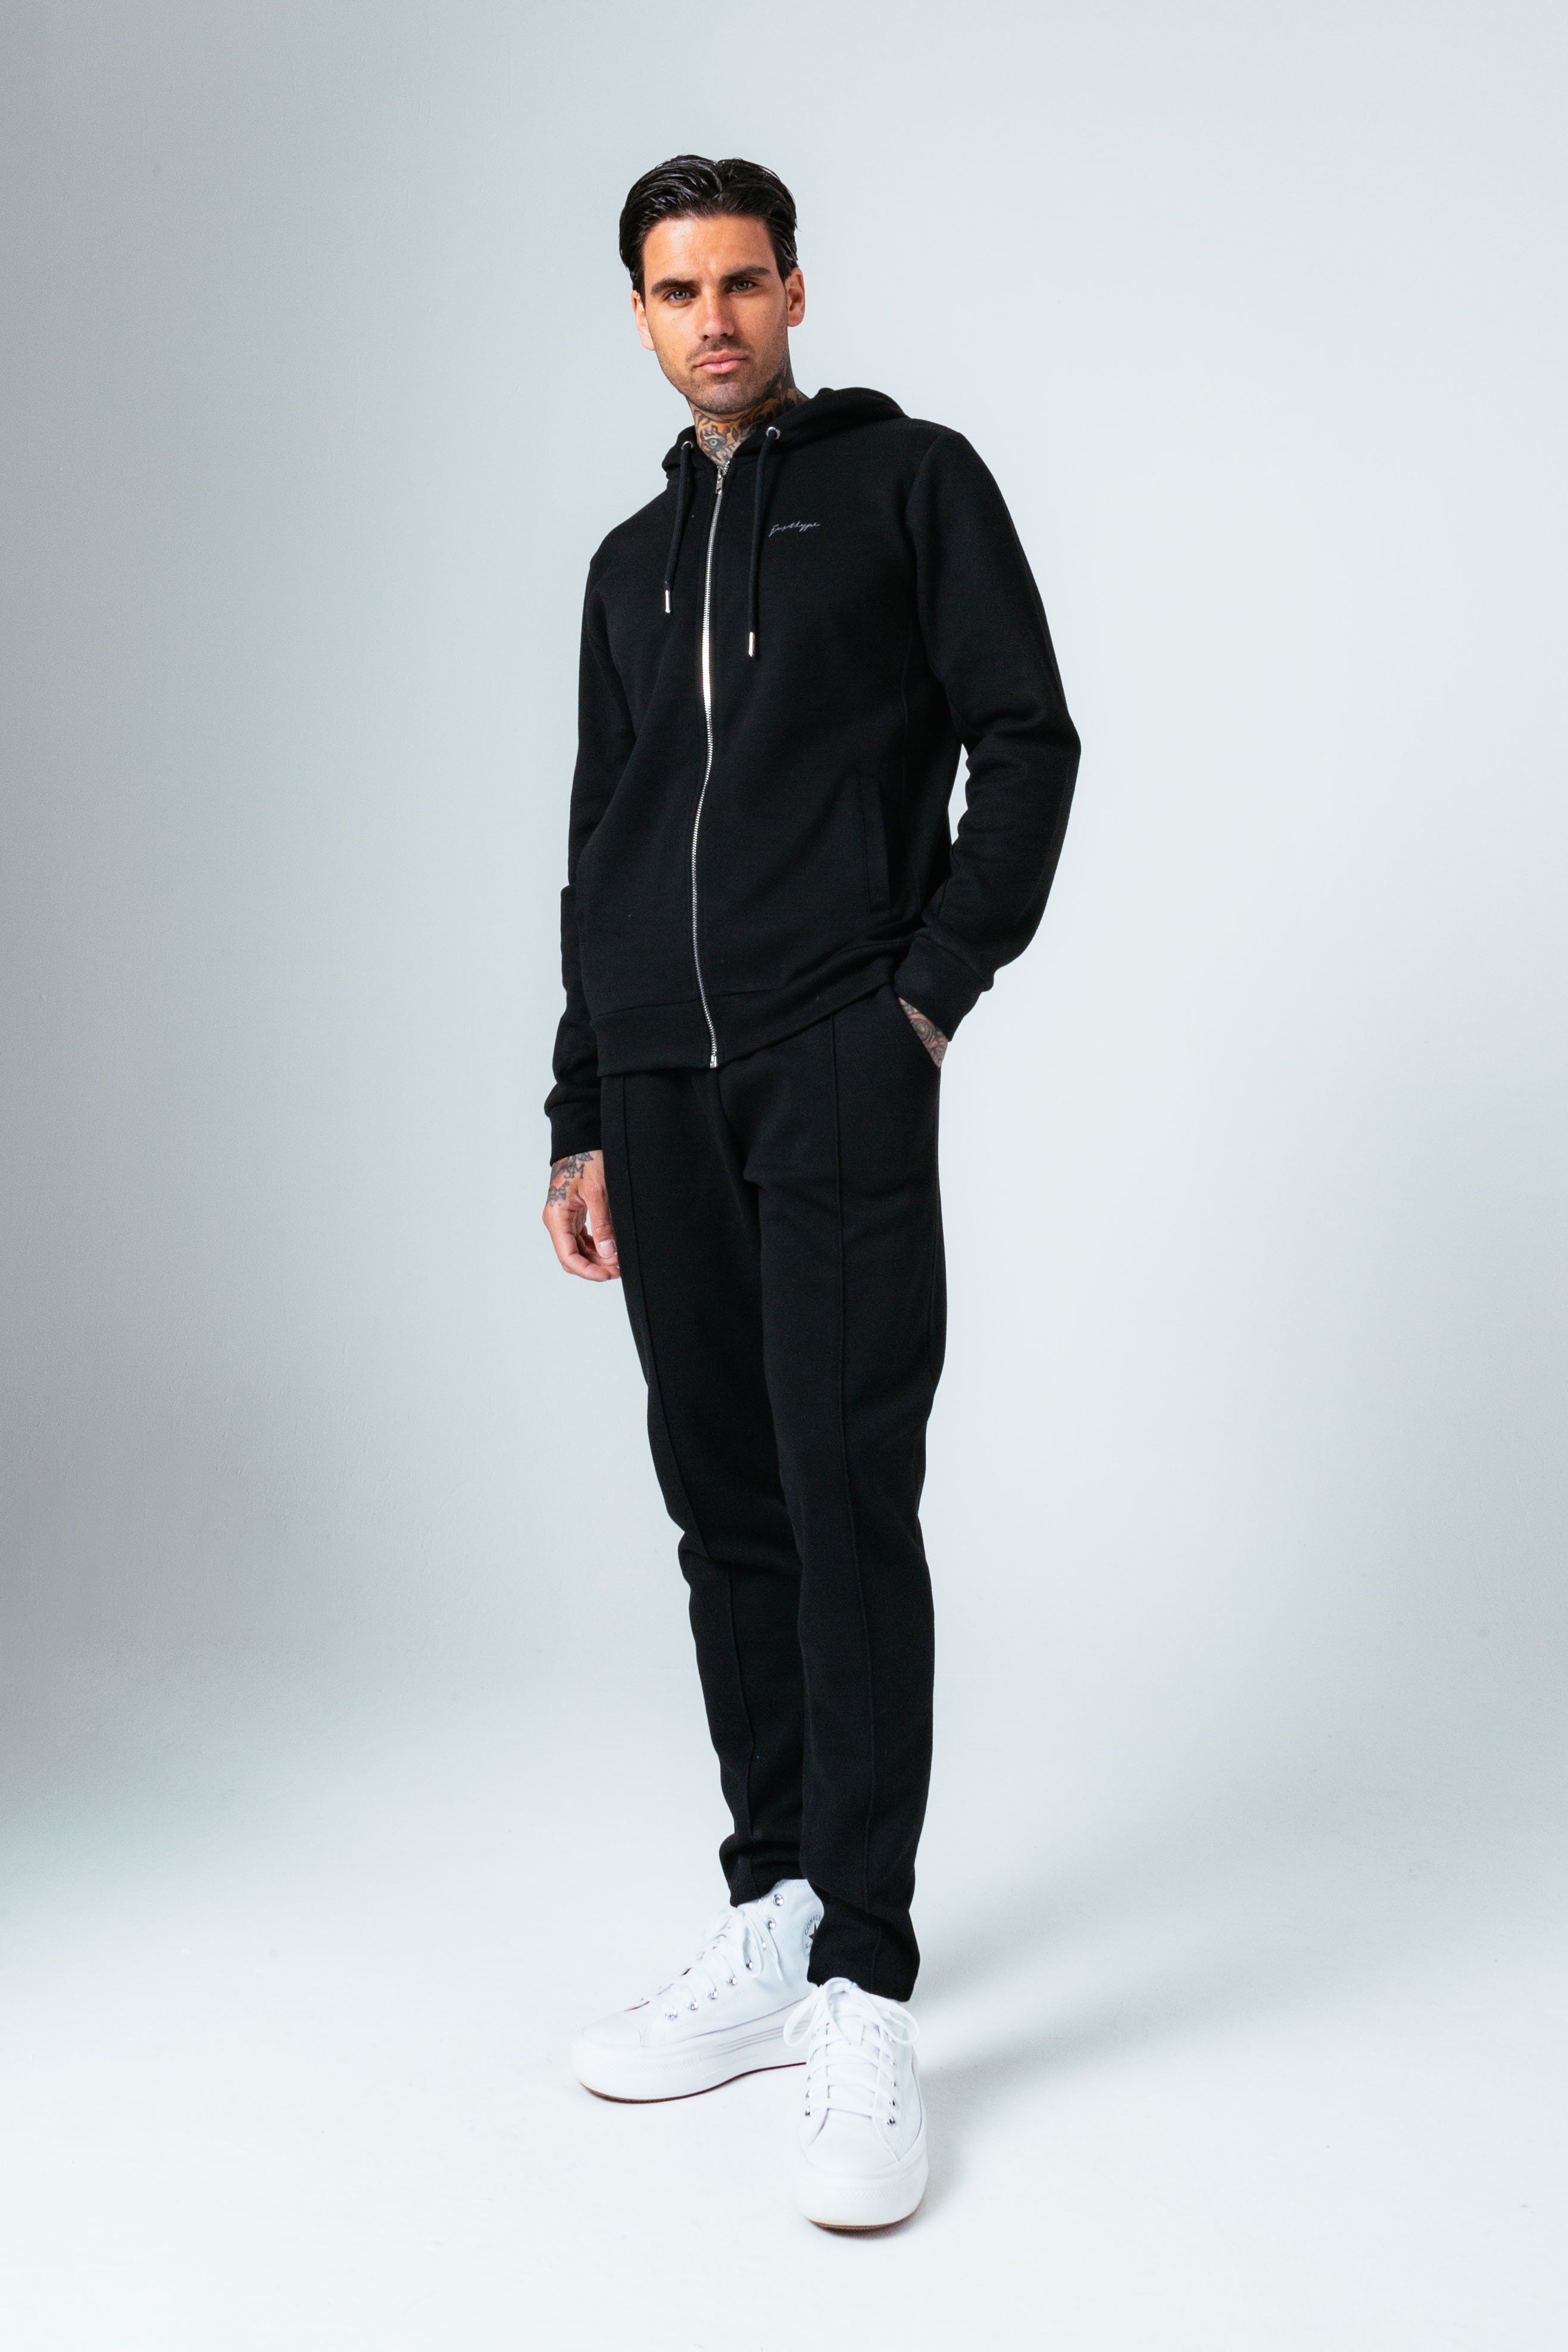 The HYPE. Black Pique Men's Jogger pairs with the HYPE. Black Pique Zip Men's Hoodie. Designed in our slim jogger shape in a 50% cotton and 50% polyester pique fabric base for the ultimate comfort and breathable space. With stitched pleat detailing, an elasticated waistband and stitched hems. Machine washable.